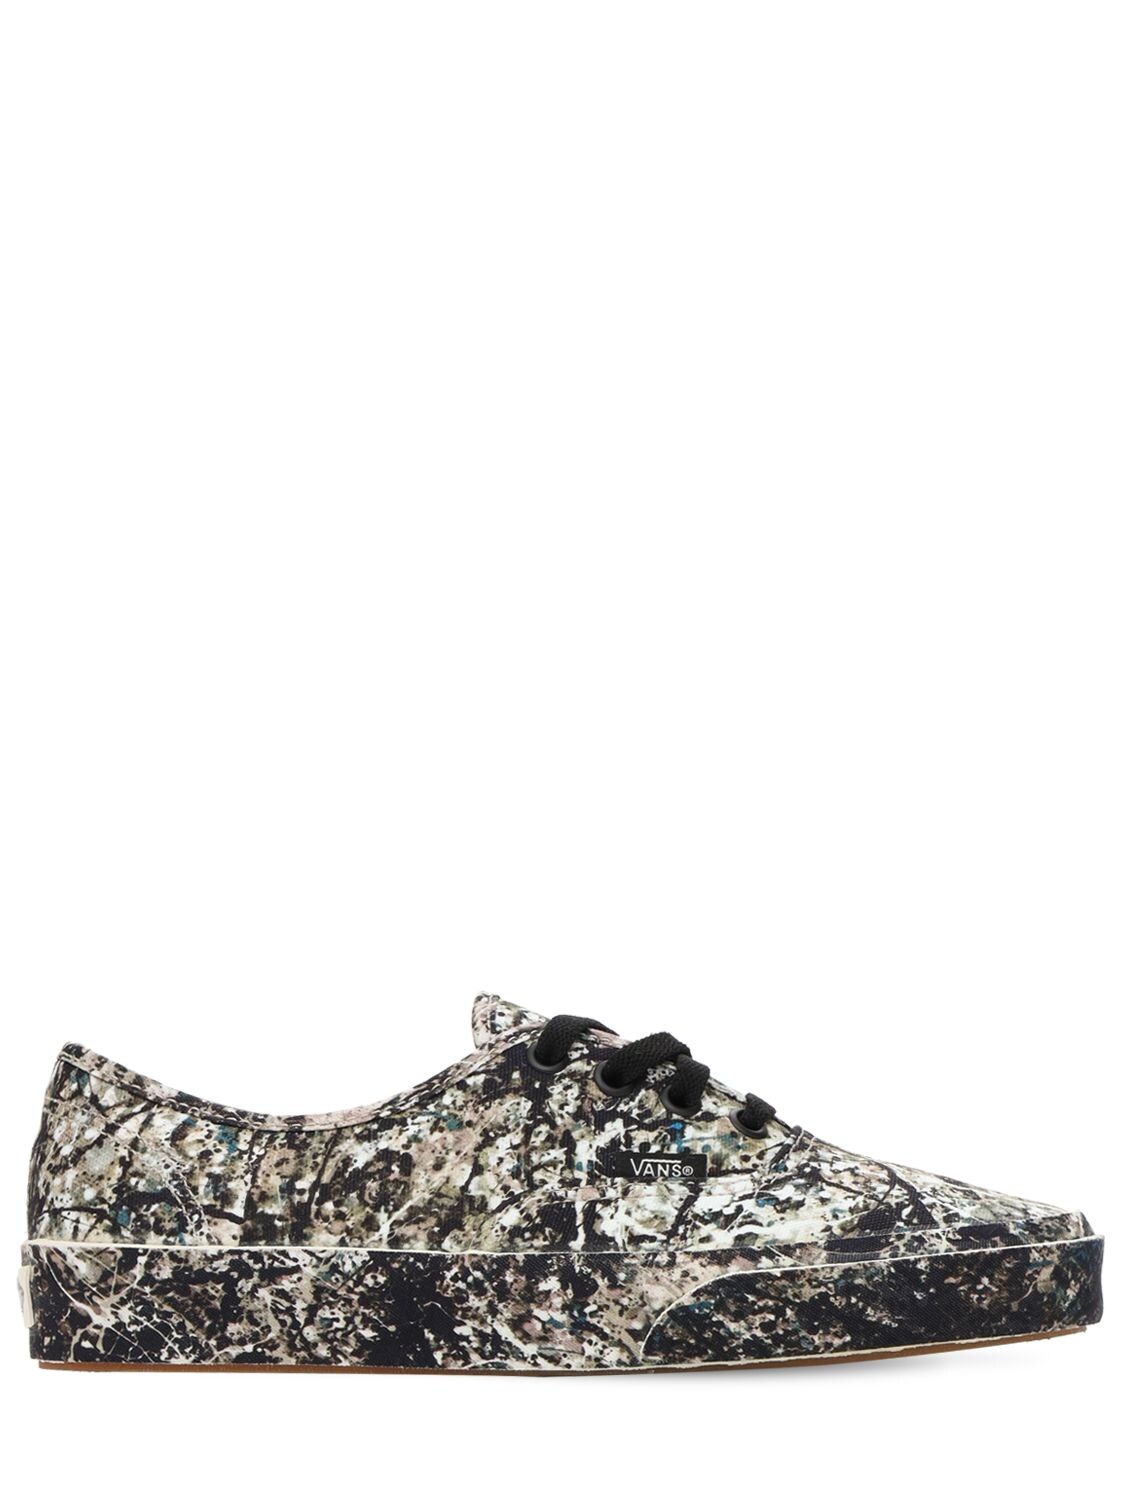 Image of Authentic Moma Jackson Pollock Sneakers